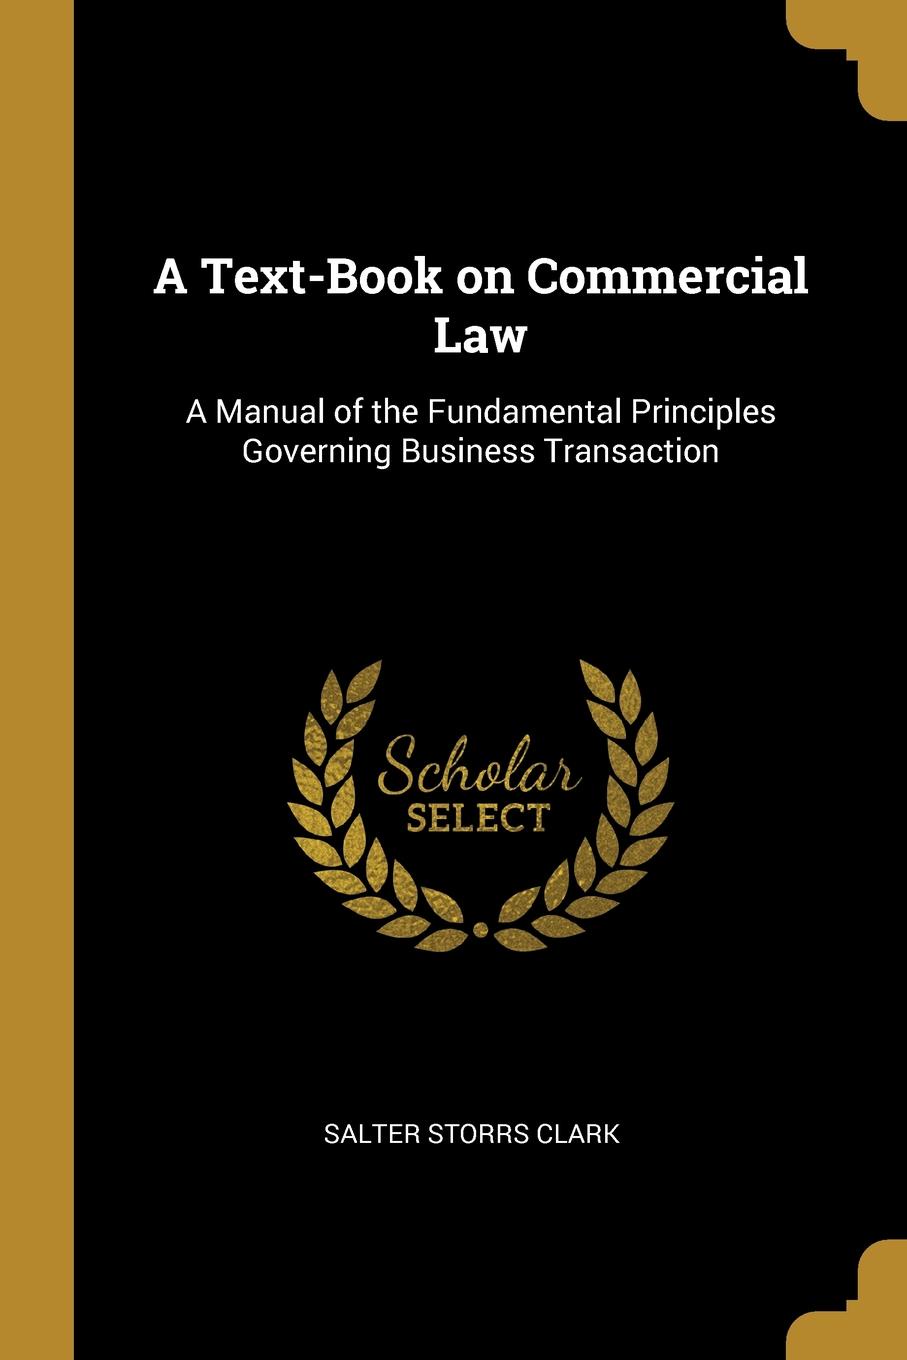 A Text-Book on Commercial Law. A Manual of the Fundamental Principles Governing Business Transaction